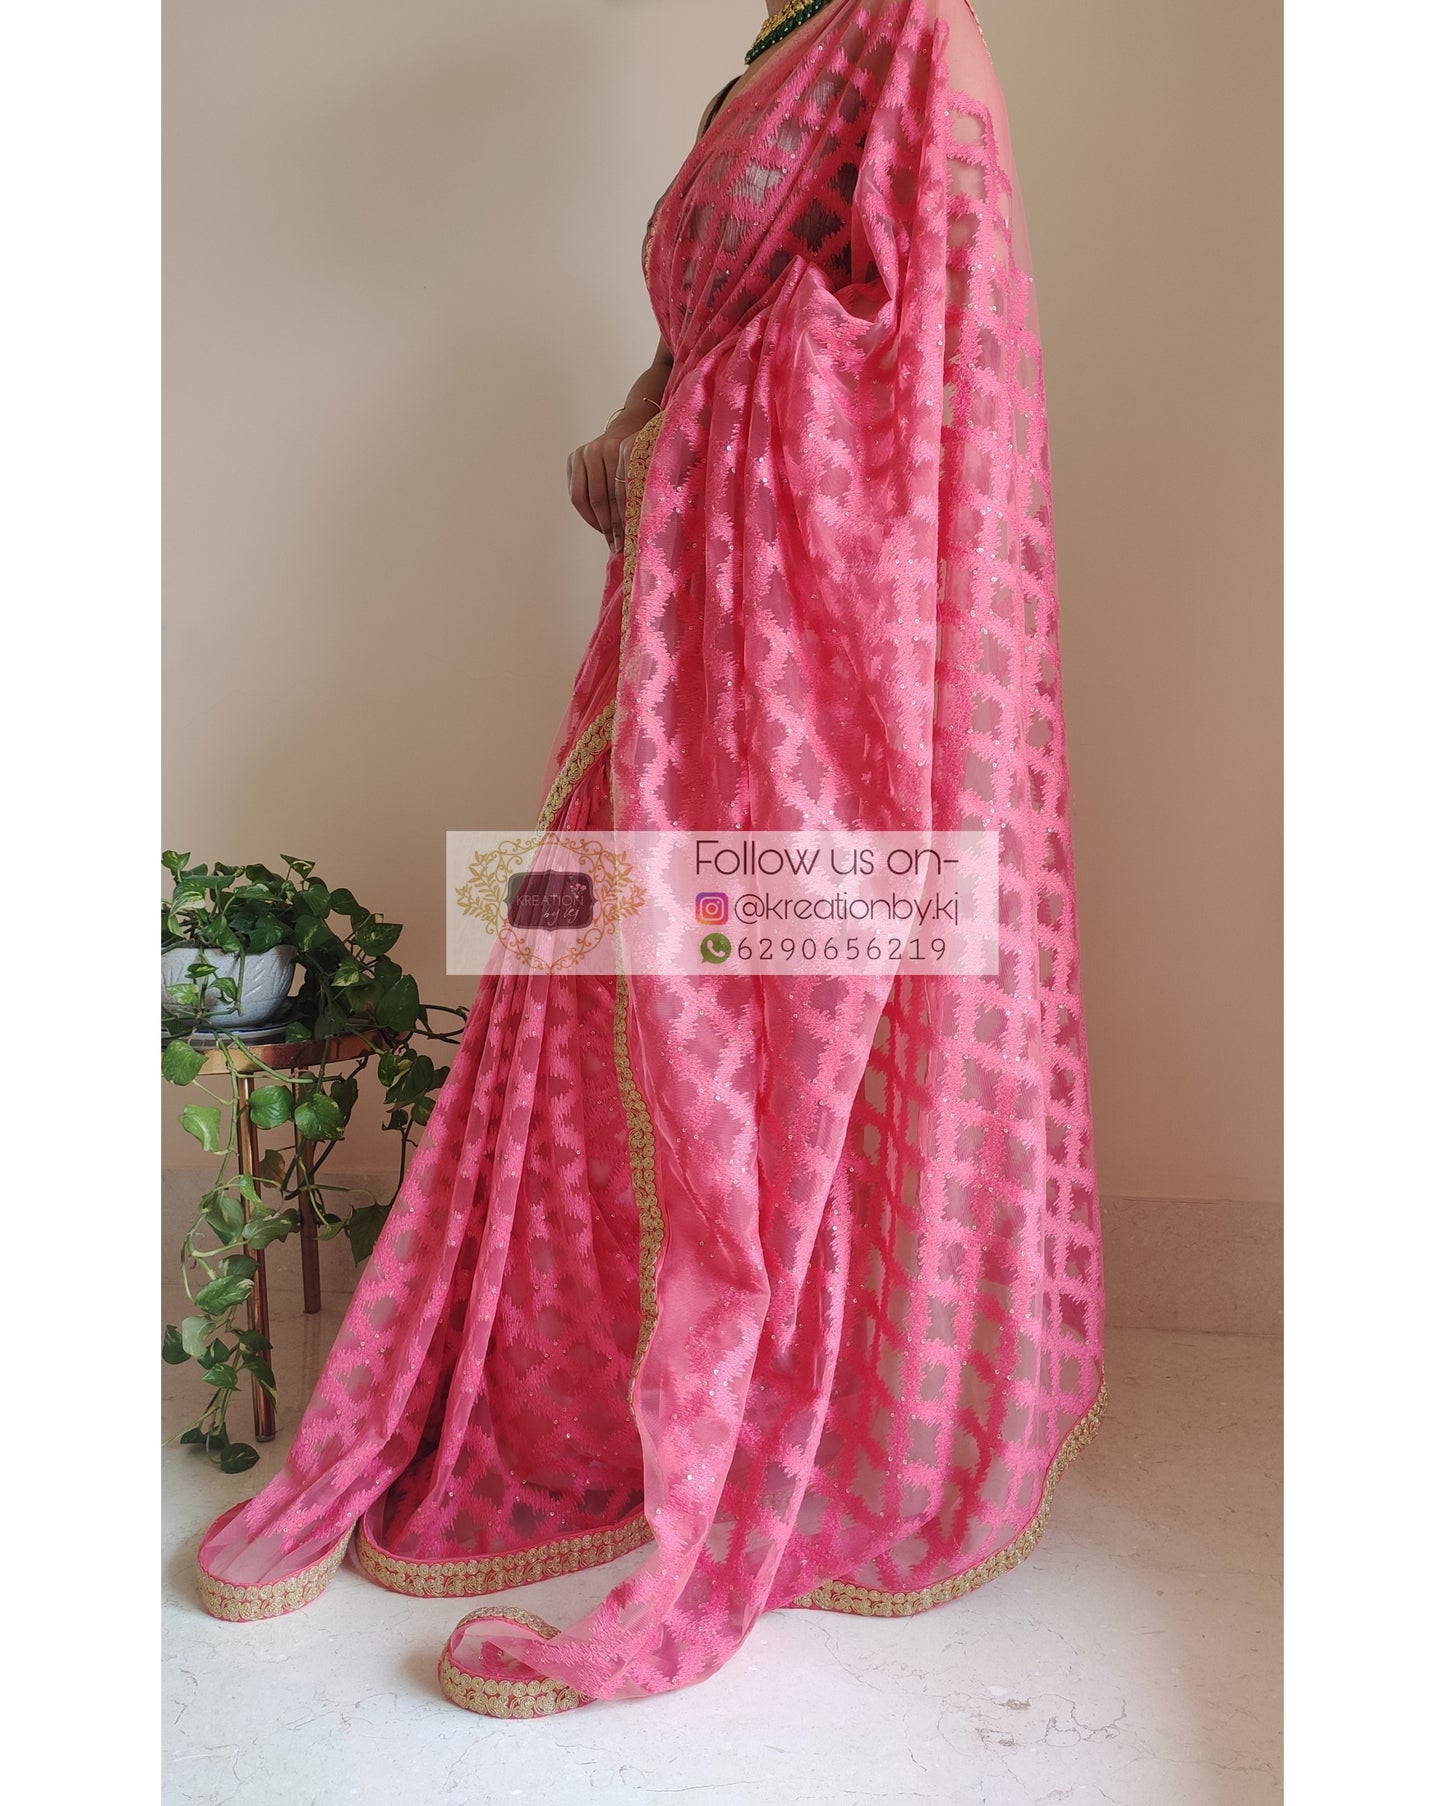 Coral Net Embroidered Saree With Zari Lace Border - kreationbykj